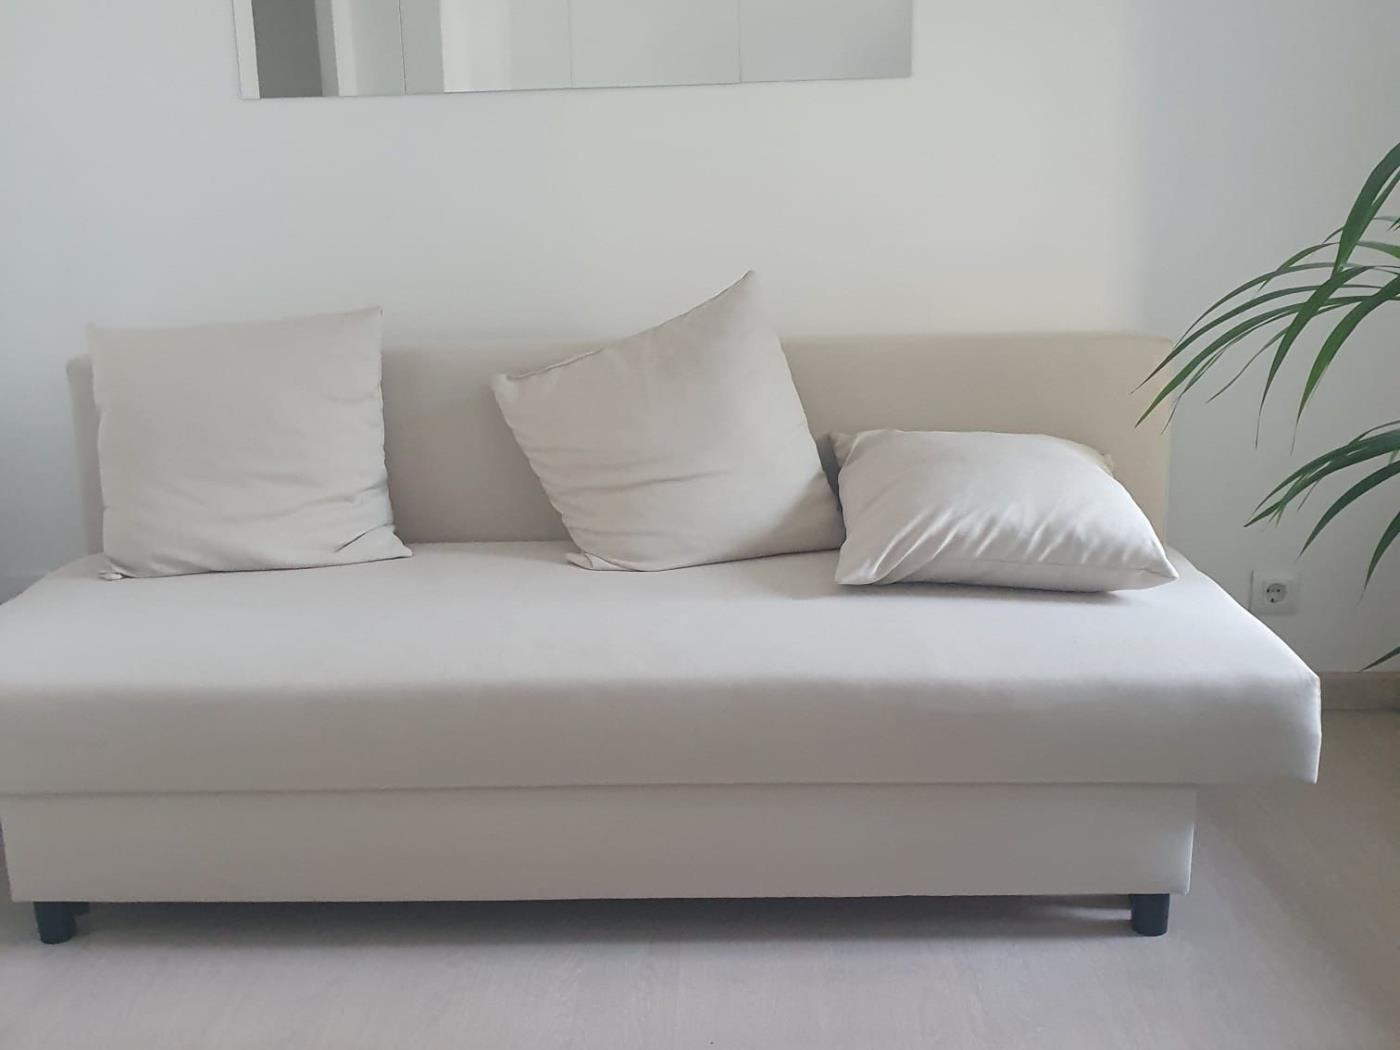 Charming furnished studio in the upper area of Barcelona ideal for couples - My Space Barcelona Apartments